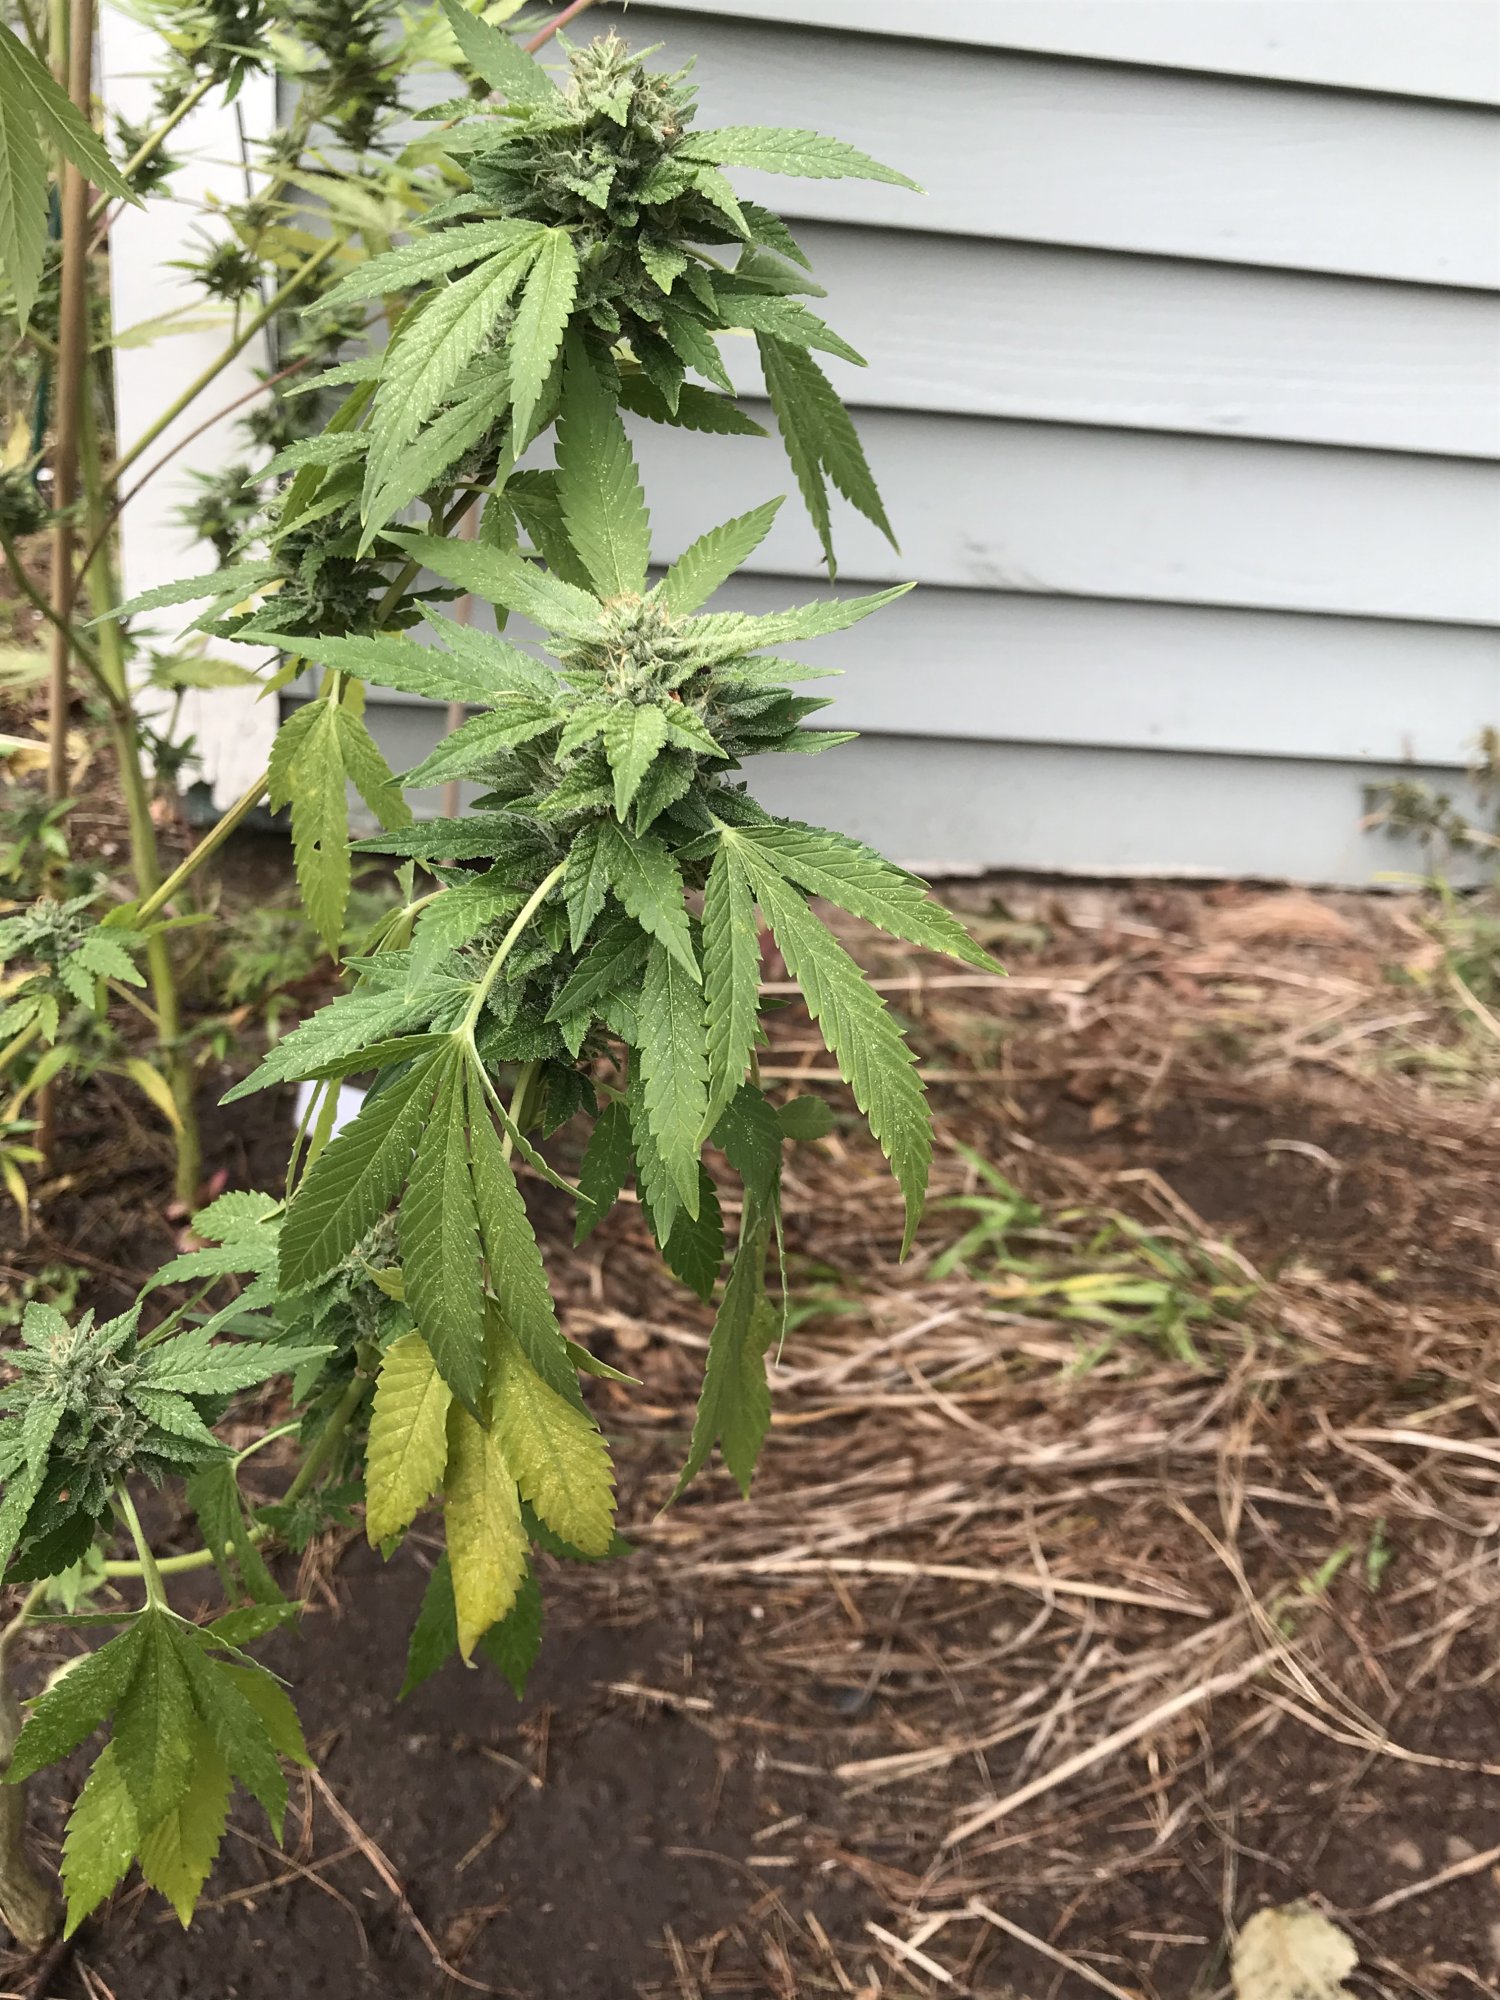 First timer needs help with outdoor grow 3